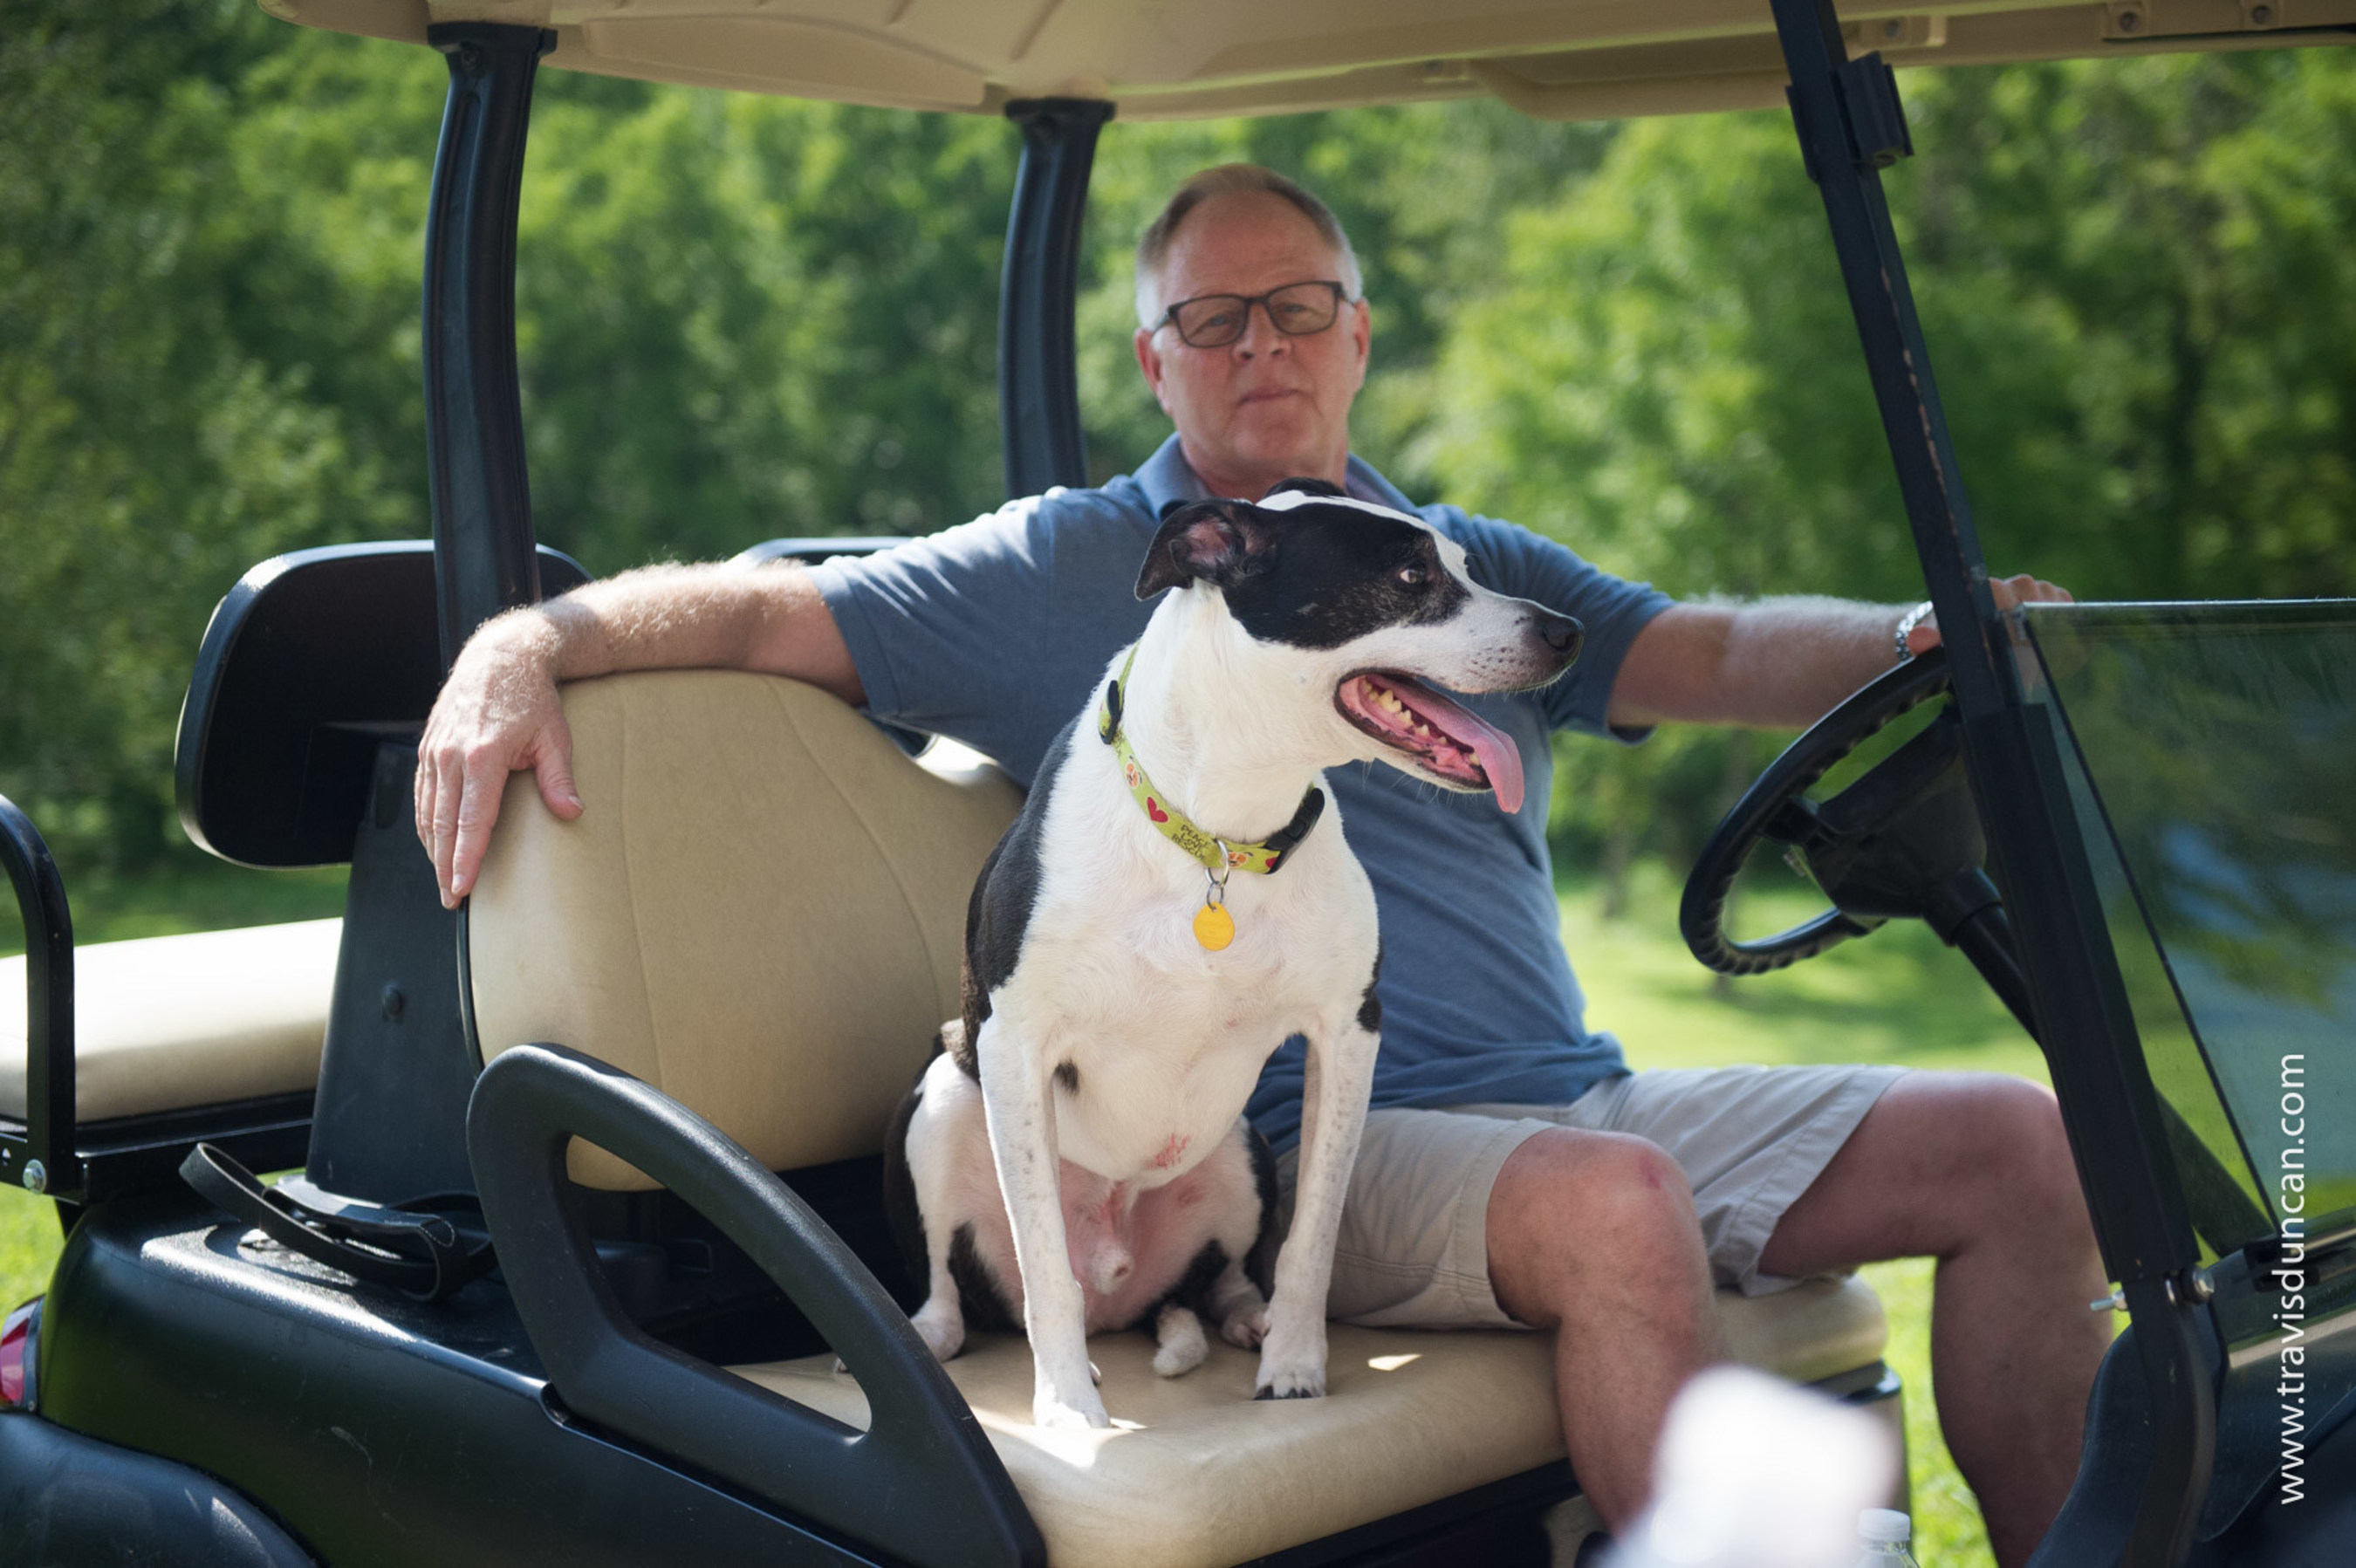 "When I adopted Lucky from the side of an Indiana highway, I saved his life. But his arrival also made my life so much better," said Kris Kiser, president and CEO of the Outdoor Power Equipment Institute. "And now Lucky has a new mission in life as TurfMutt." The TurfMutt environmental education and stewardship program, in partnership with Scholastic, teaches children in grades K-5 to take care of the environment while learning science. Learn more at www.TurfMutt.com.